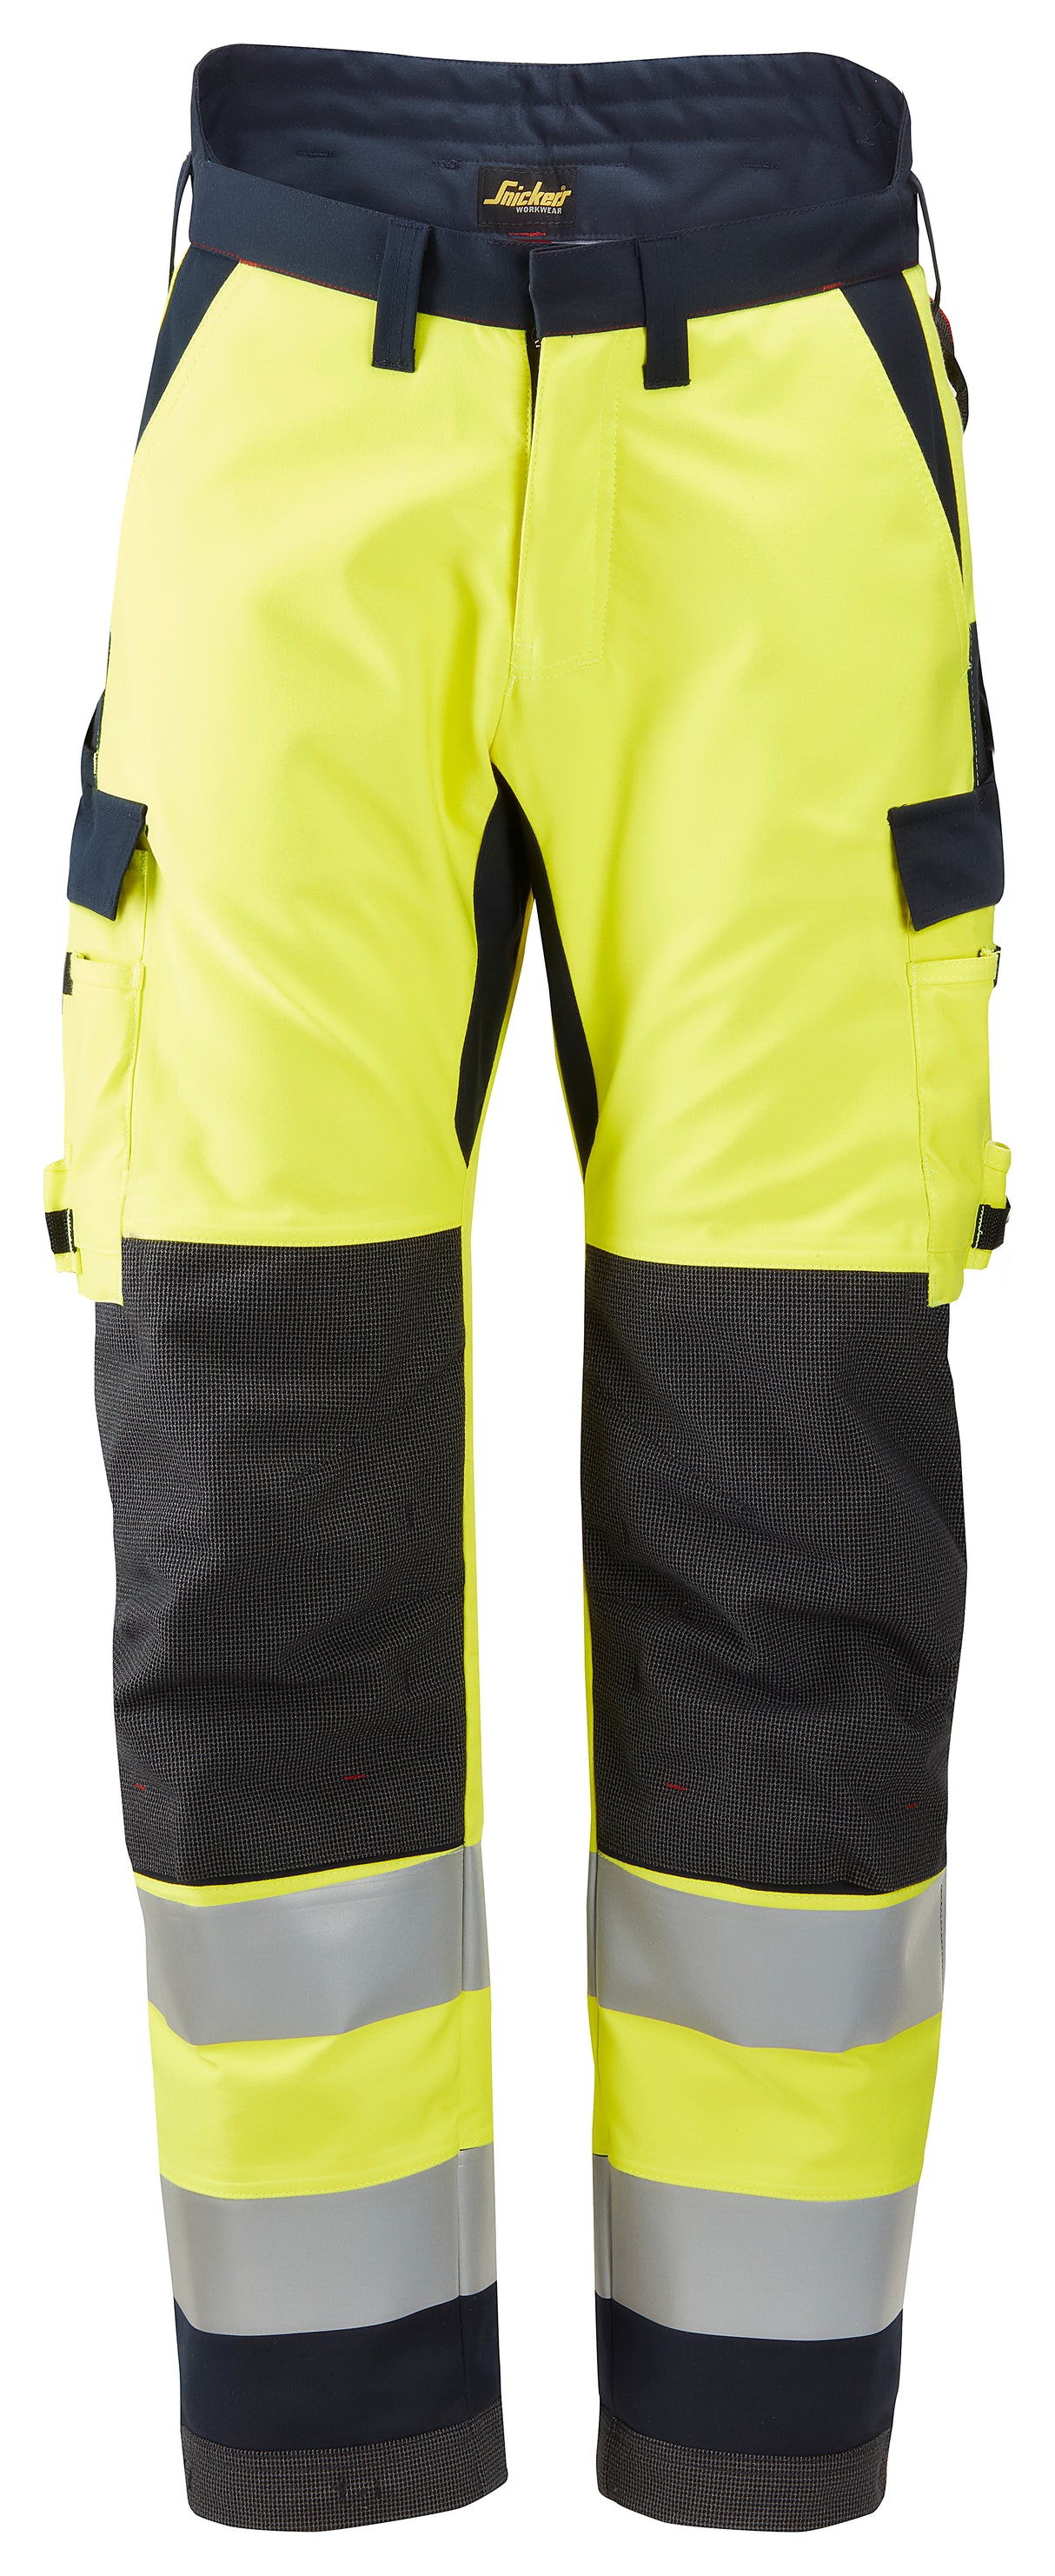 Snickers 6663 Protecwork Insulated Trousers Hi-vis Class 2